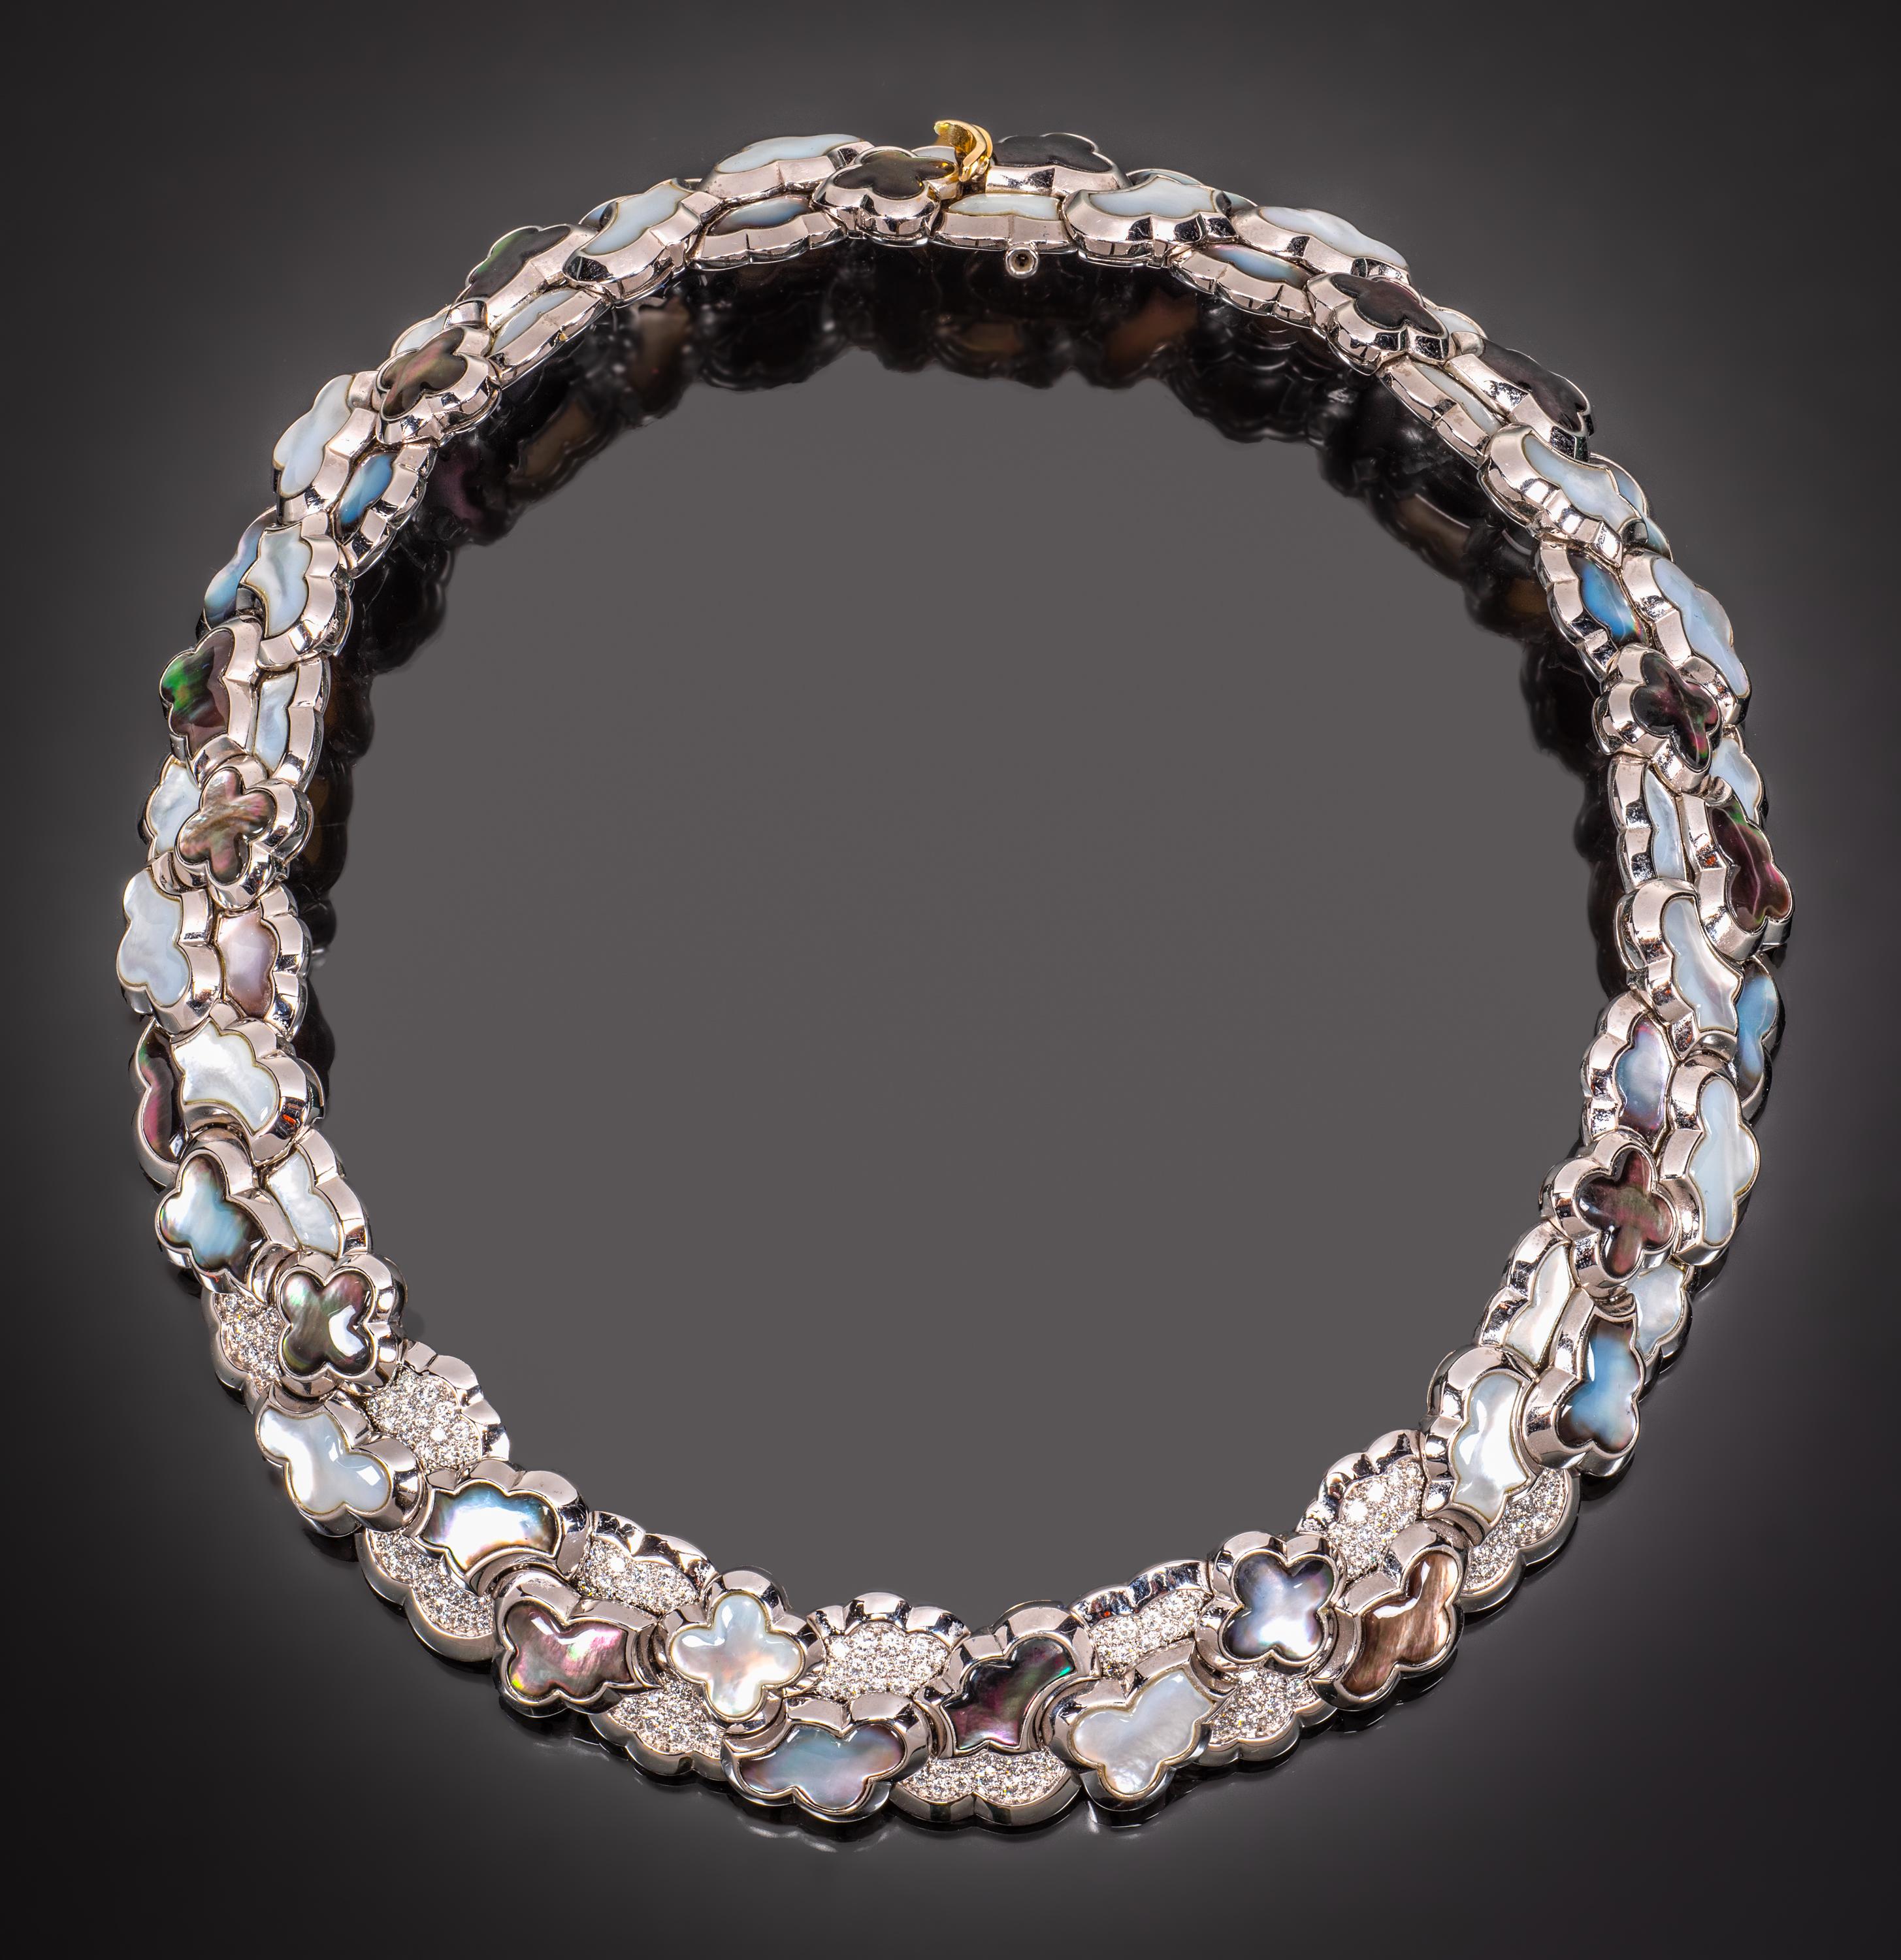 The Alhambra Collection was created in 1968 and is still one of Van Cleef & Arpels’ most popular designs. This rare vintage necklace, no longer in production, is composed of gray and white mother-of-pearl cloud-form links interspersed with the